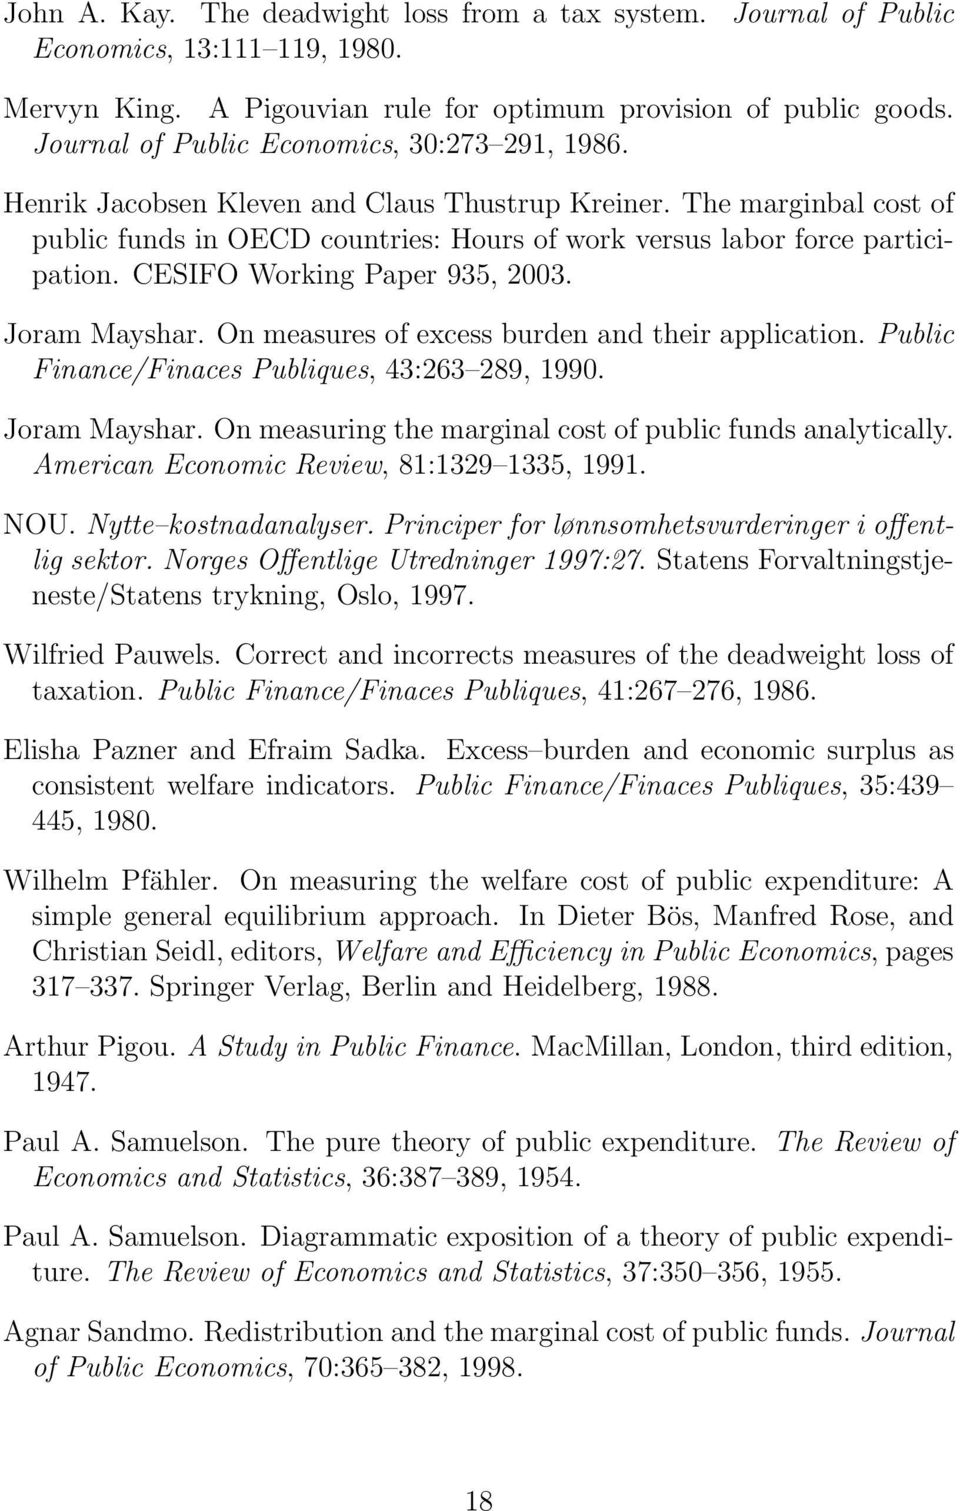 CESIFO Working Paper 935, 2003. Joram Mayshar. On measures of excess burden and their application. Public Finance/Finaces Publiques, 43:263 289, 1990. Joram Mayshar. On measuring the marginal cost of public funds analytically.